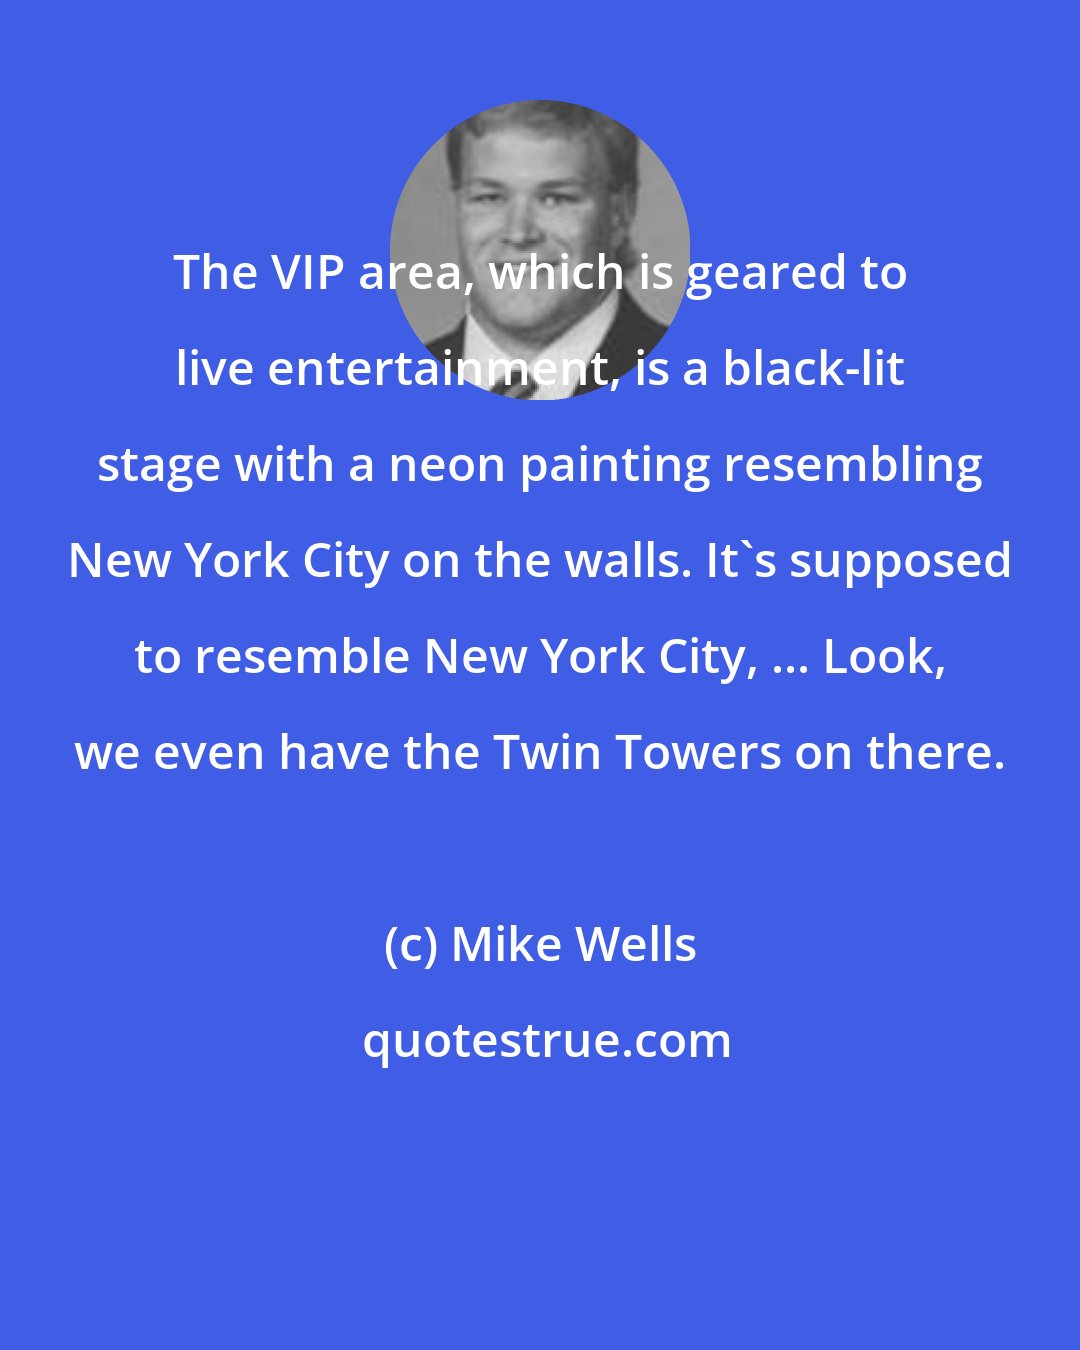 Mike Wells: The VIP area, which is geared to live entertainment, is a black-lit stage with a neon painting resembling New York City on the walls. It's supposed to resemble New York City, ... Look, we even have the Twin Towers on there.